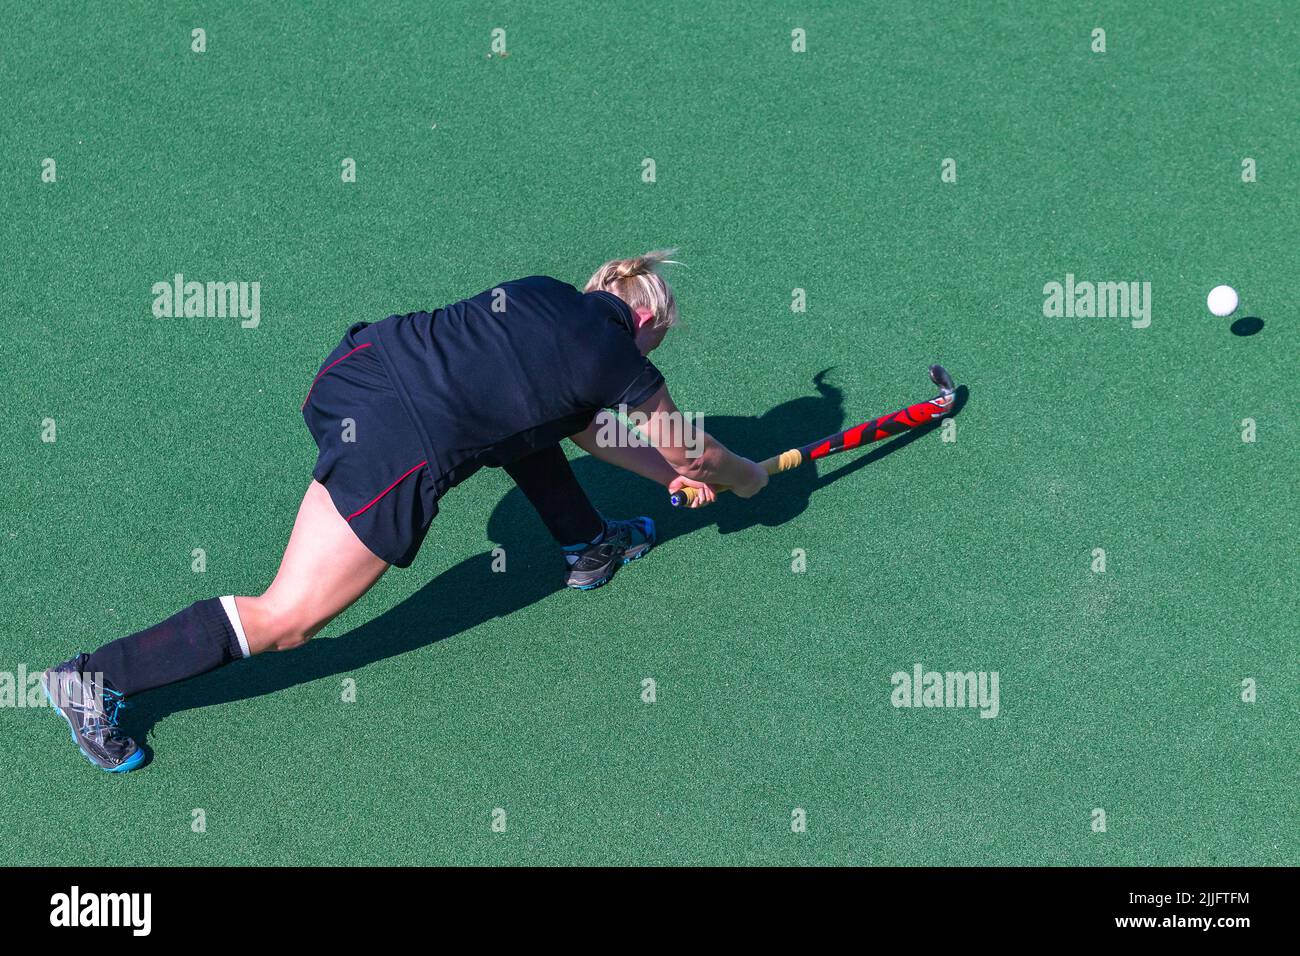 Hockey game girl player pushes pass the ball on astro turf overhead action photo. Stock Photo